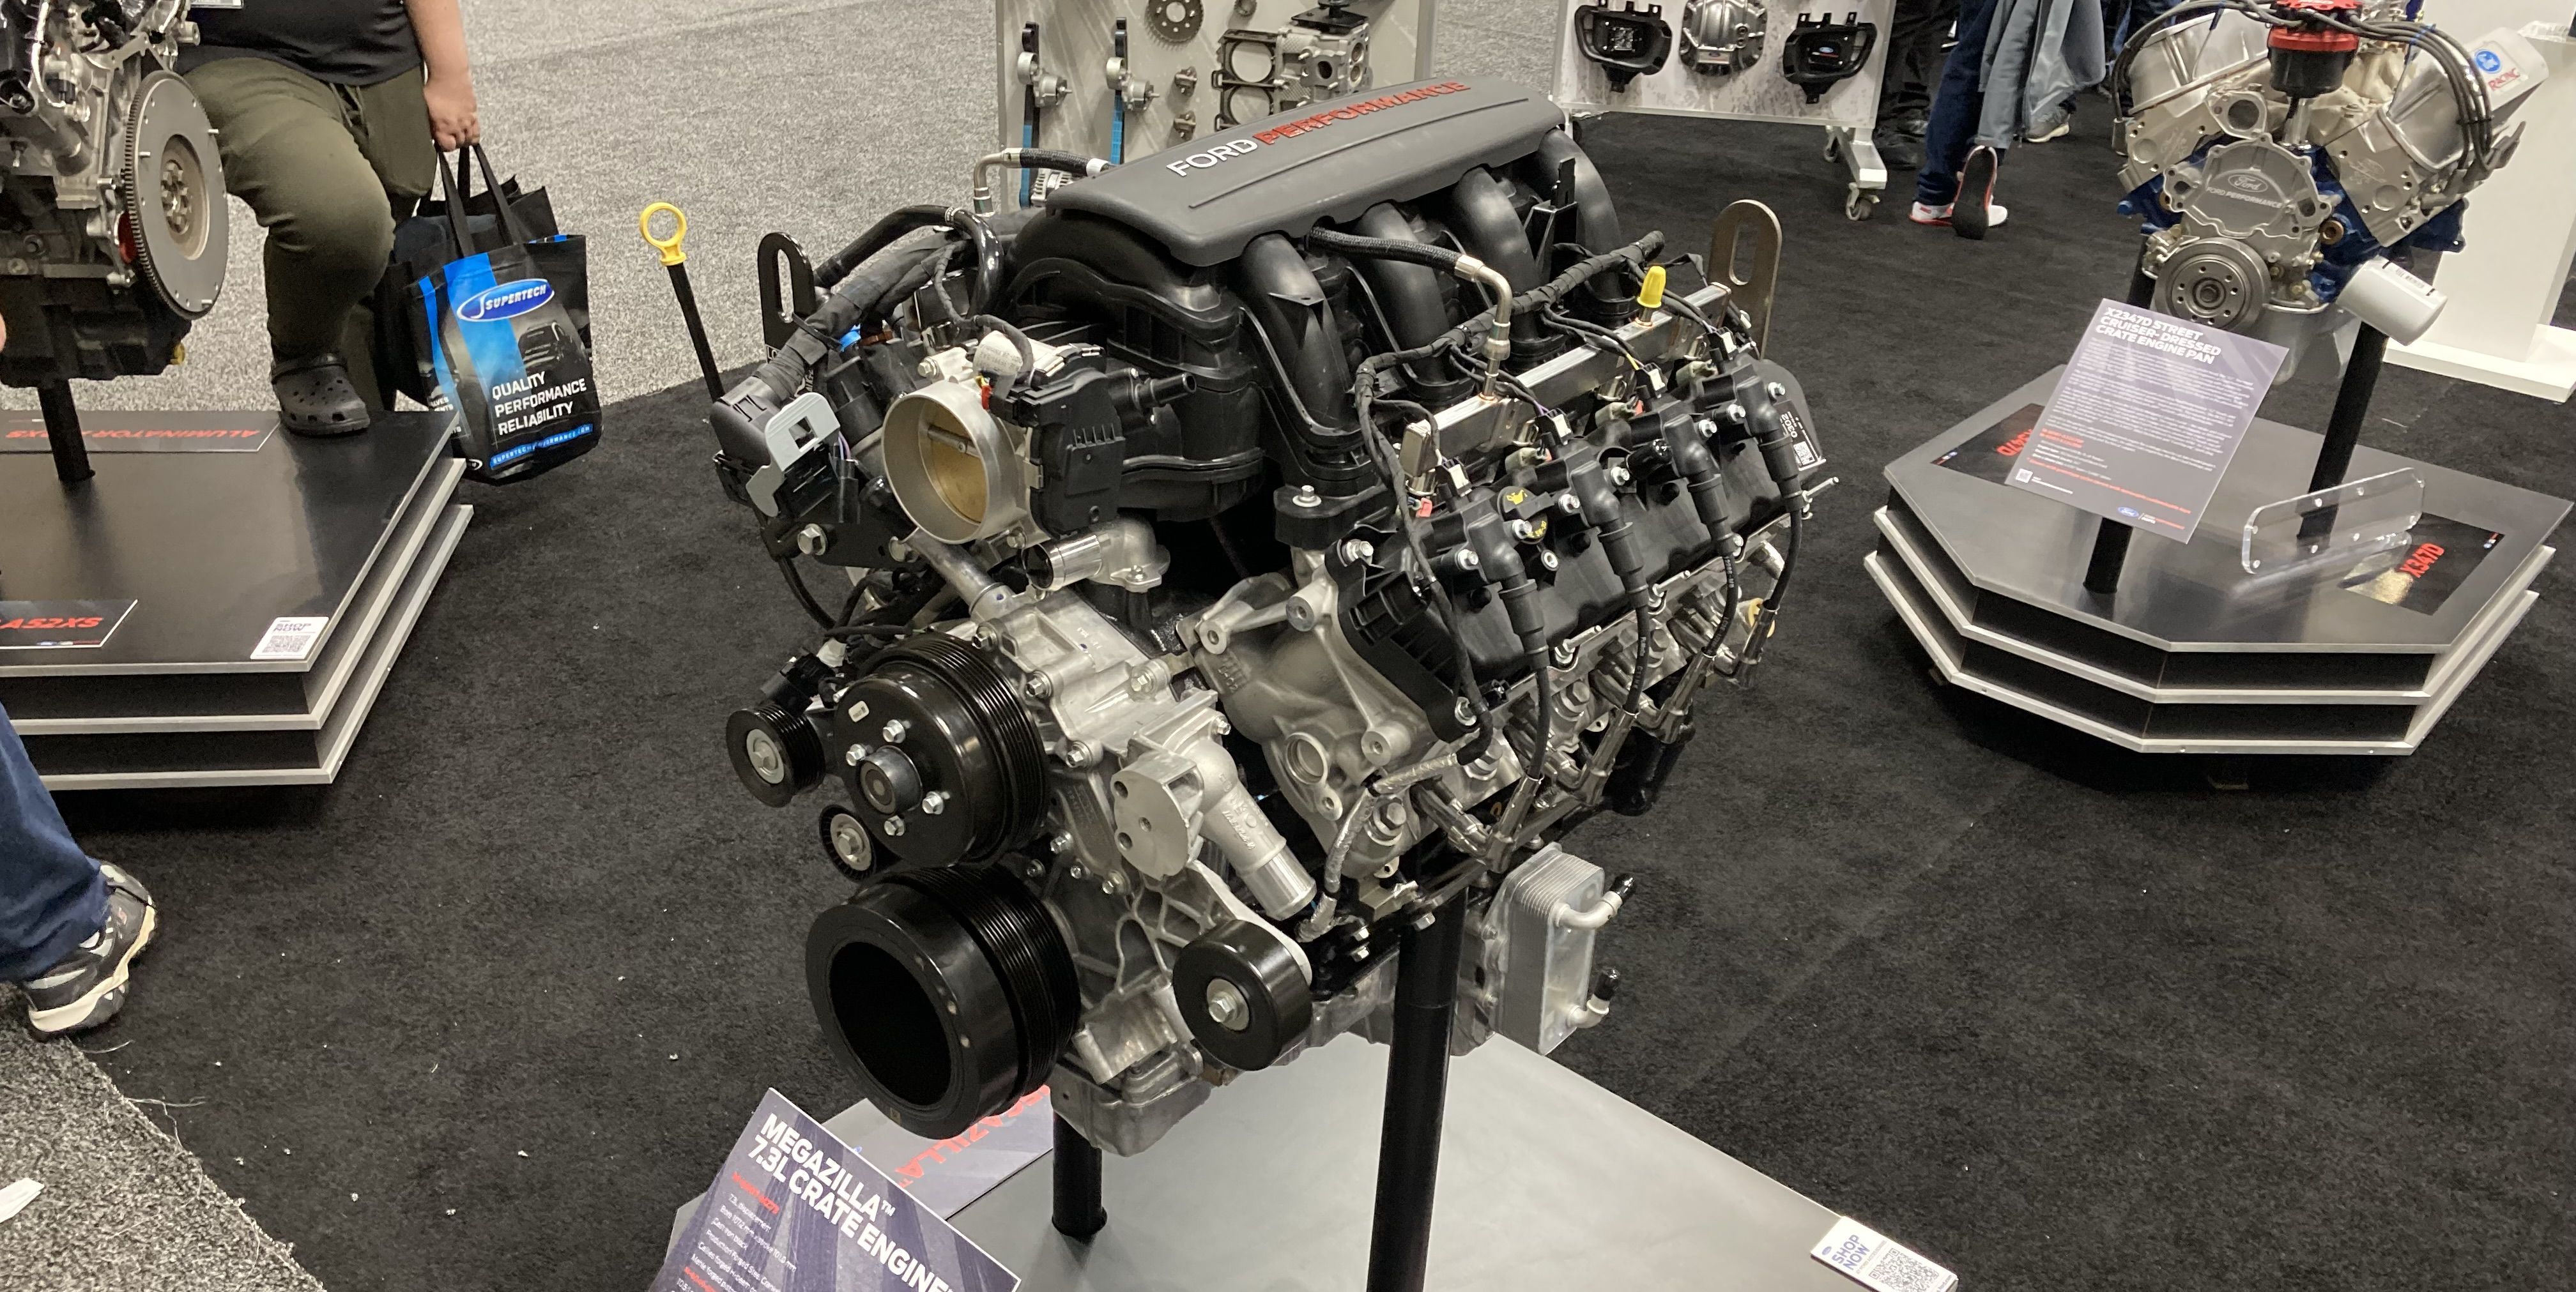 Ford Megazilla Crate Engine Gets 615 HP Thanks to Forged Internals